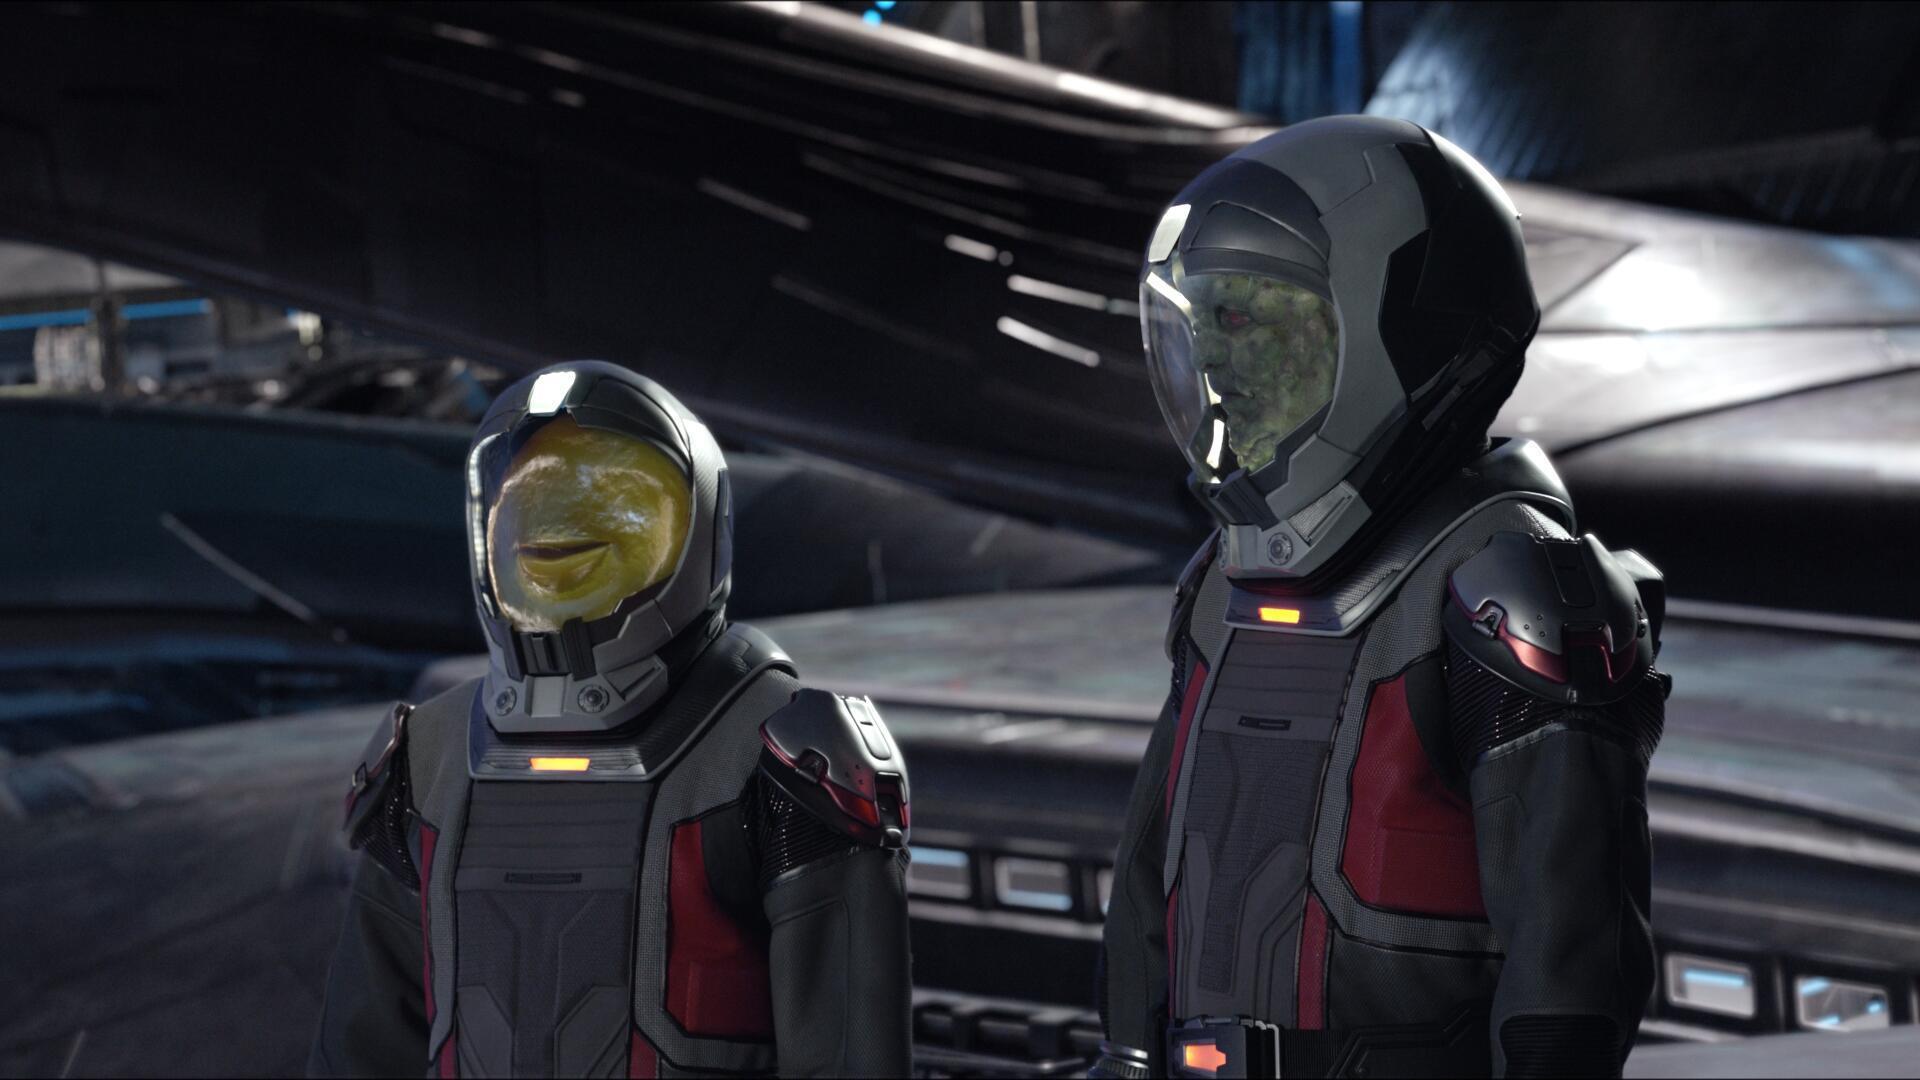 The Orville: New Horizons -- “Electric Sheep” - Episode 301 -- The Orville crew deals with the interpersonal aftermath of the battle against the Kaylon on the season three premiere of “The Orville: New Horizons”. (Photo by: Hulu)